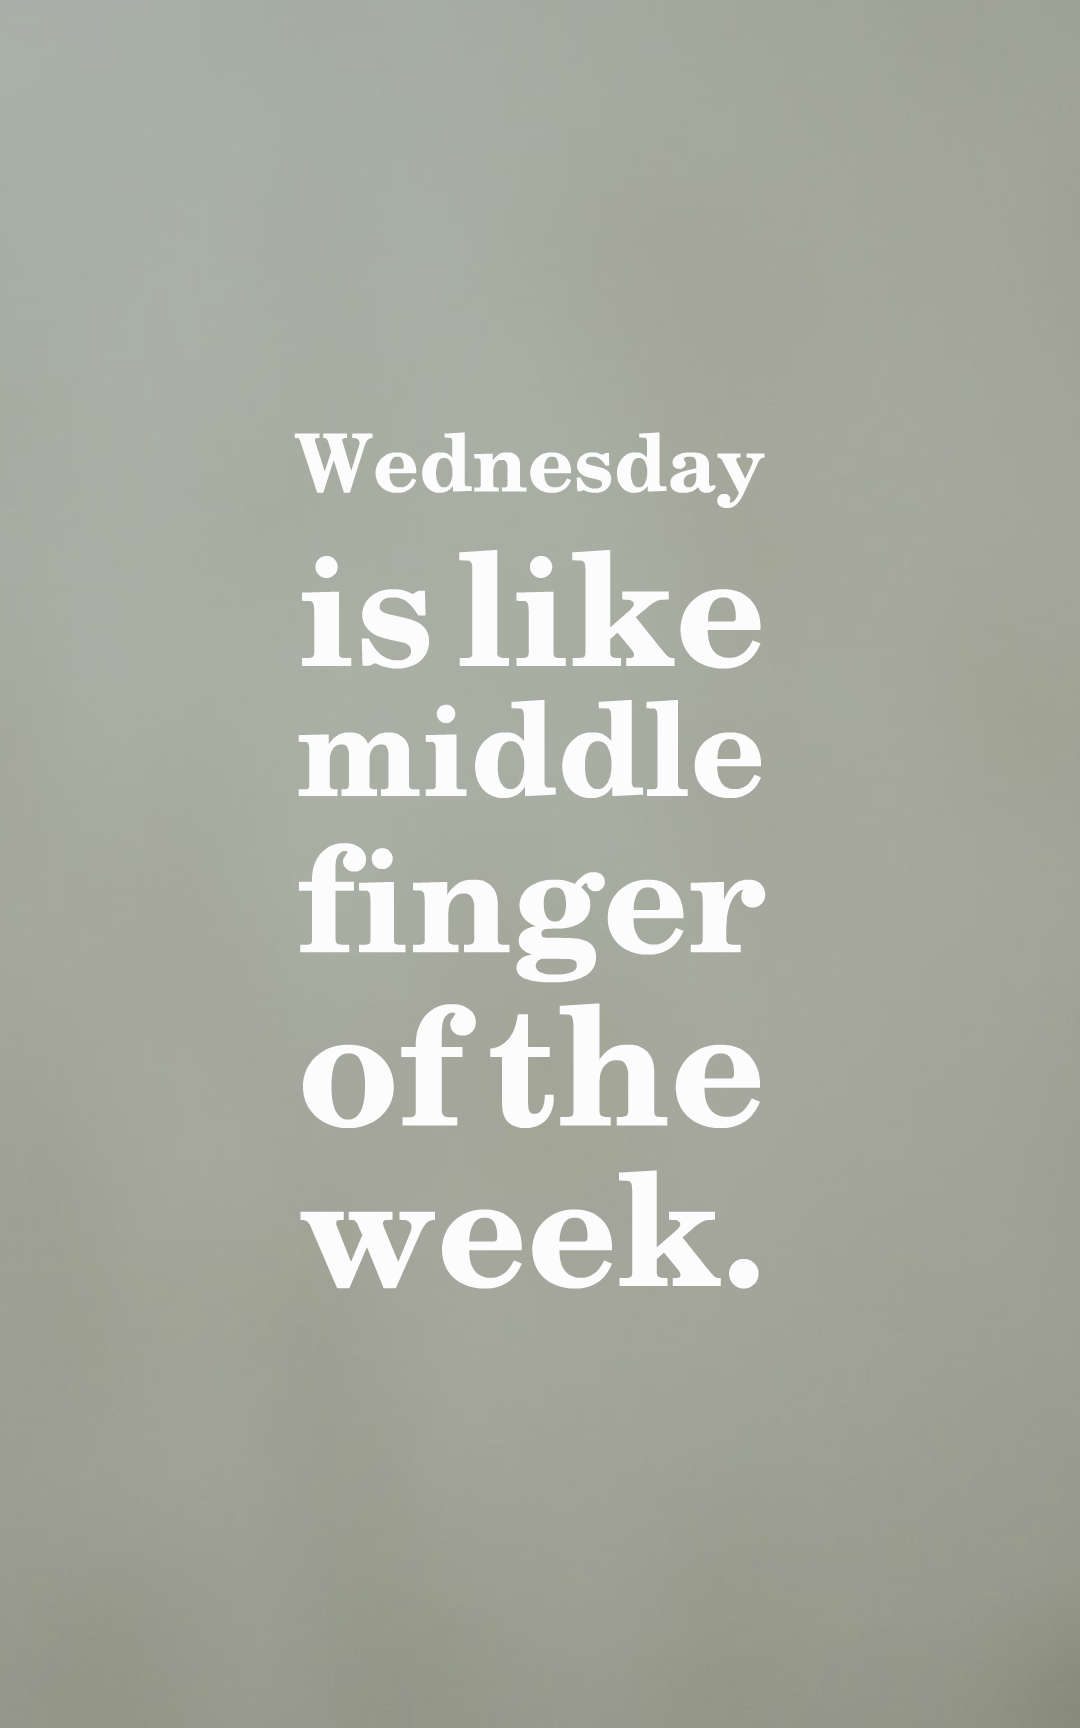 Wednesday is like middle finger of the week.